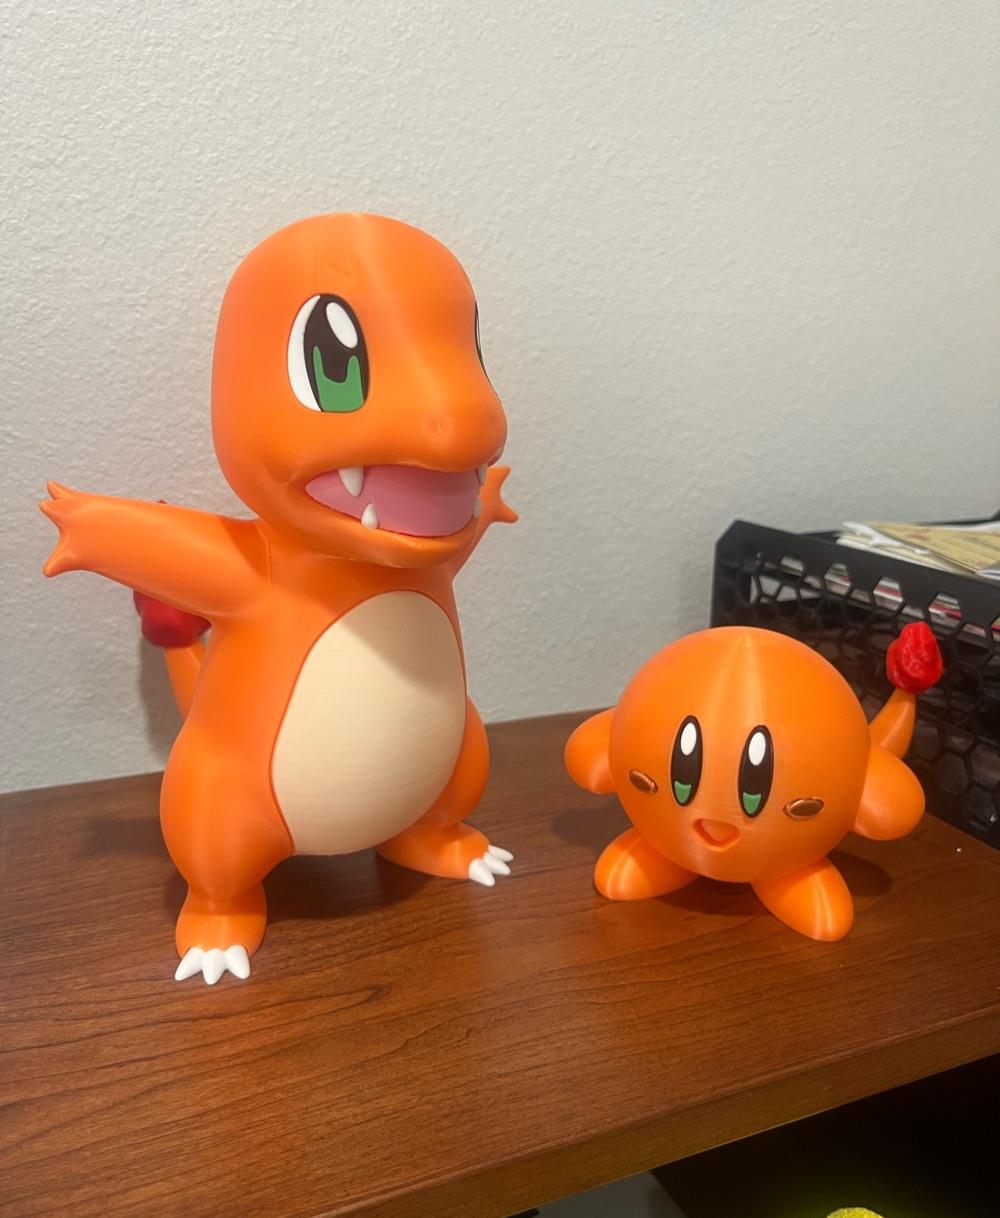 Charmander Pokemon  - I printed it out at 170% as big, as my print bed would allow. It turned out good. I probably should have increased the insert parts another couple percent to get a snugger fit but happy with the result.

Orange: Elegoo Rapid PLA Plus Orange
Green: Overture PLA Plus Green
Pink: Elegoo PLA Pink
White: Elegoo PLA White
Black: Overture Easy PLA Black
Tan: Ziro PLA Pro Skin
Red: Overture PLA Red - 3d model